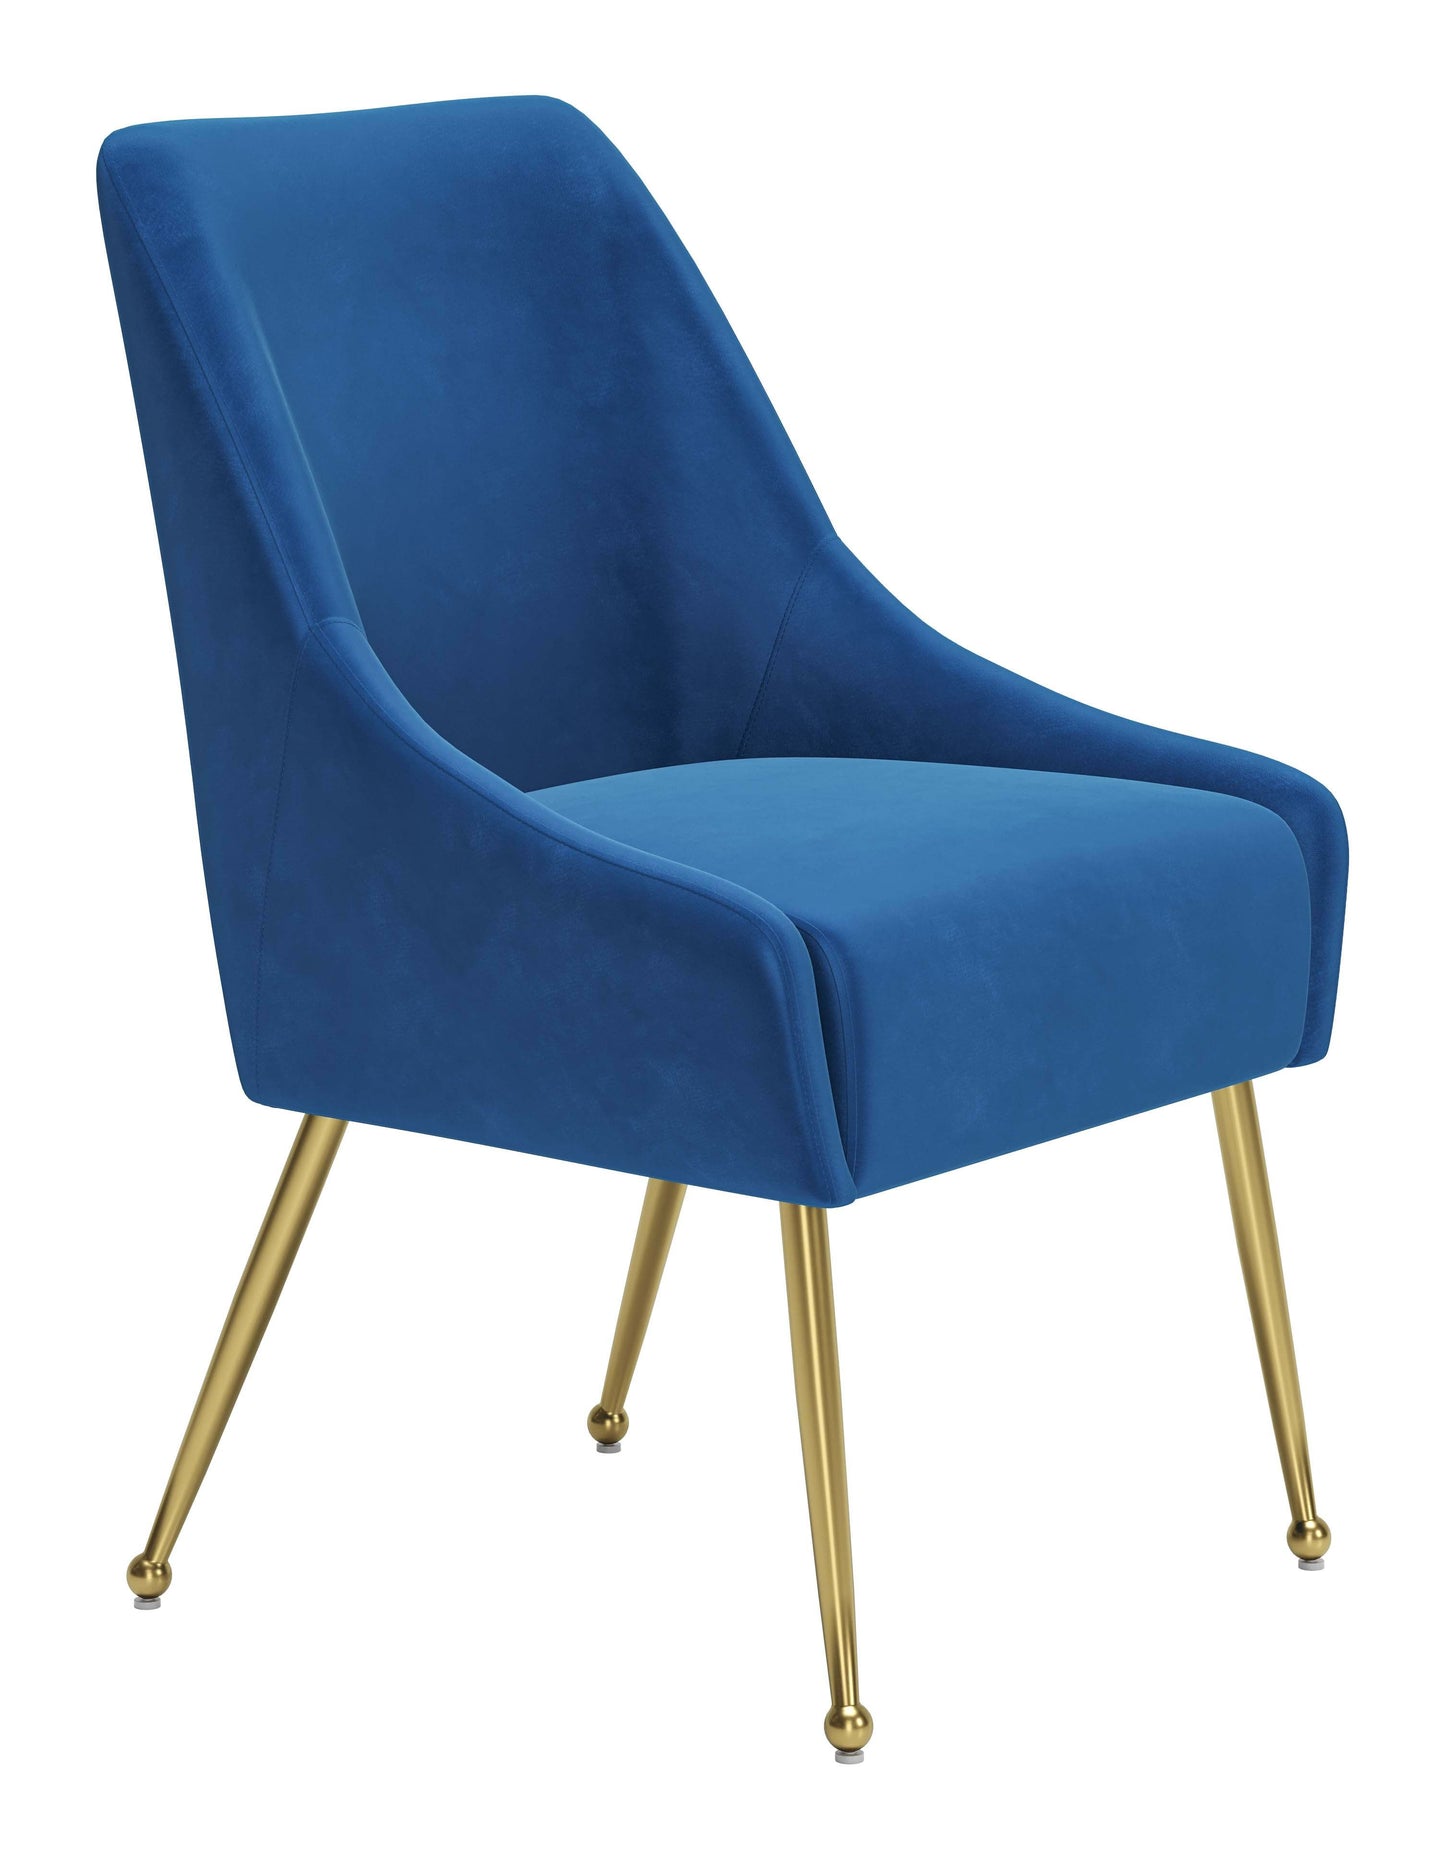 Madelaine Dining Chair Navy